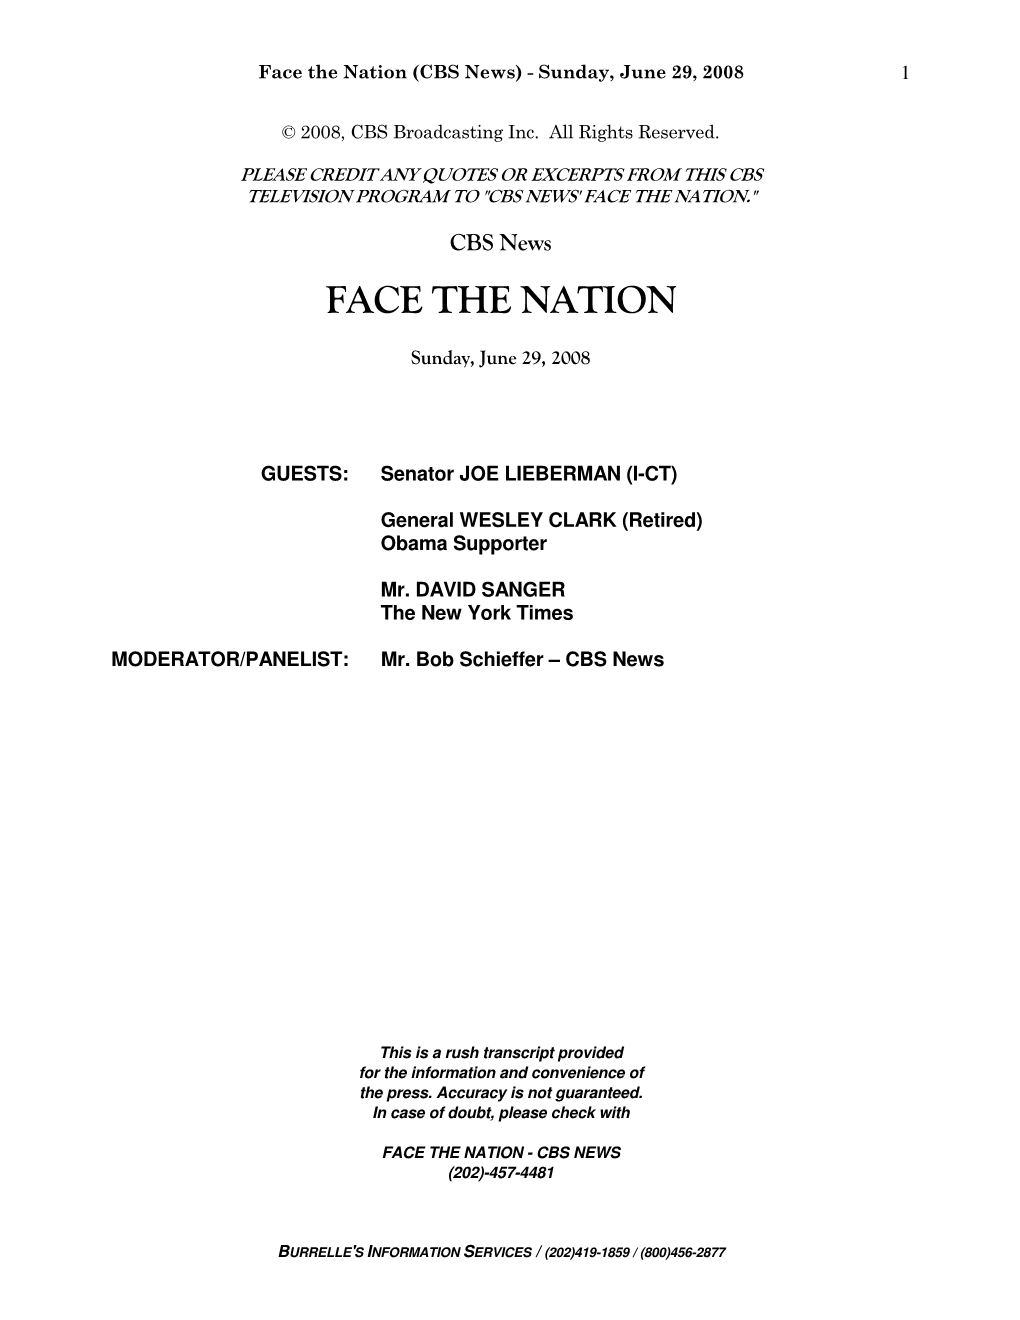 "Face the Nation" Transcript Here